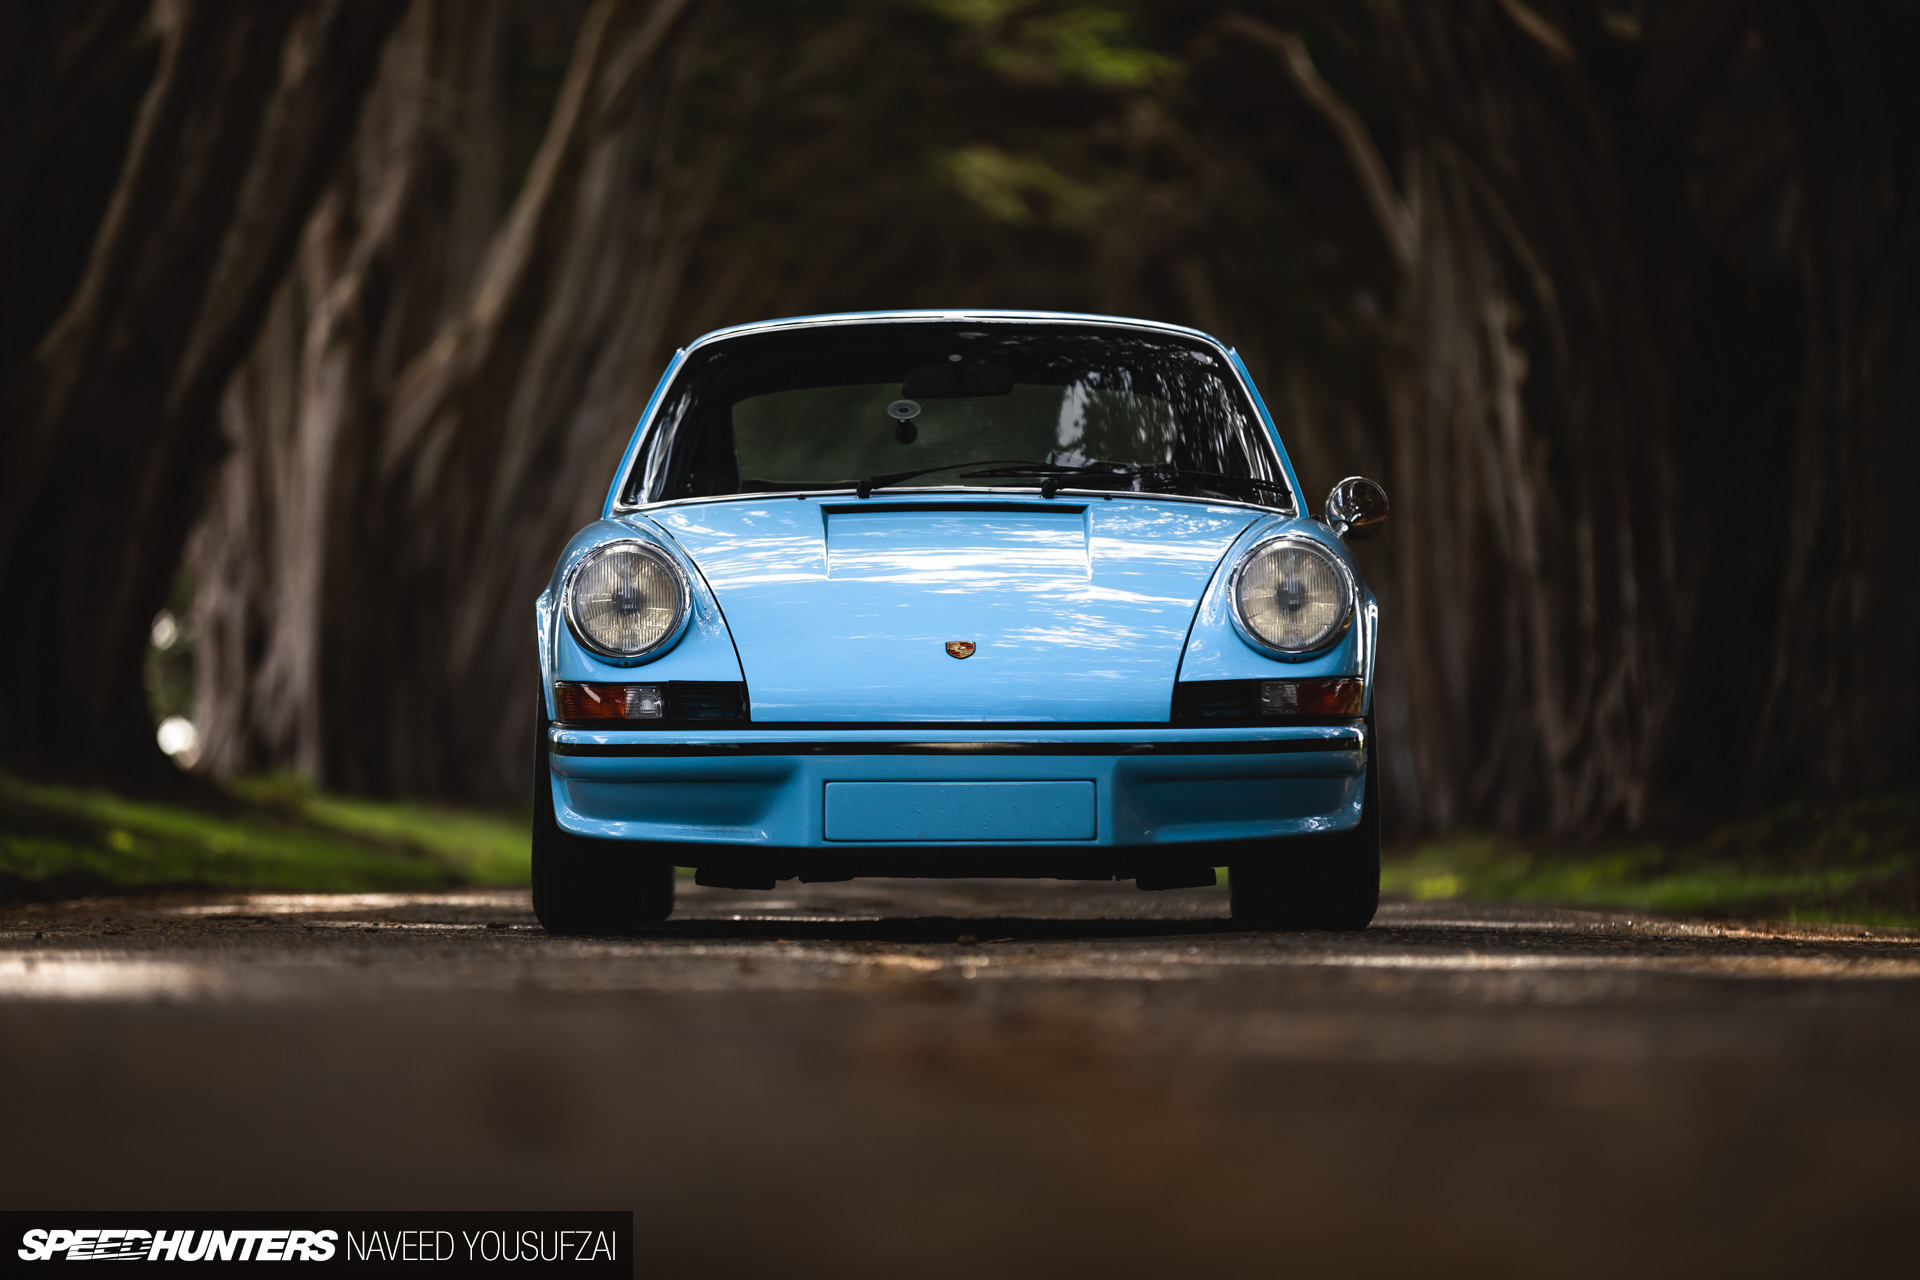 The Holy Grail of Homologation: A 1973 Porsche Carrera RS  - Speedhunters